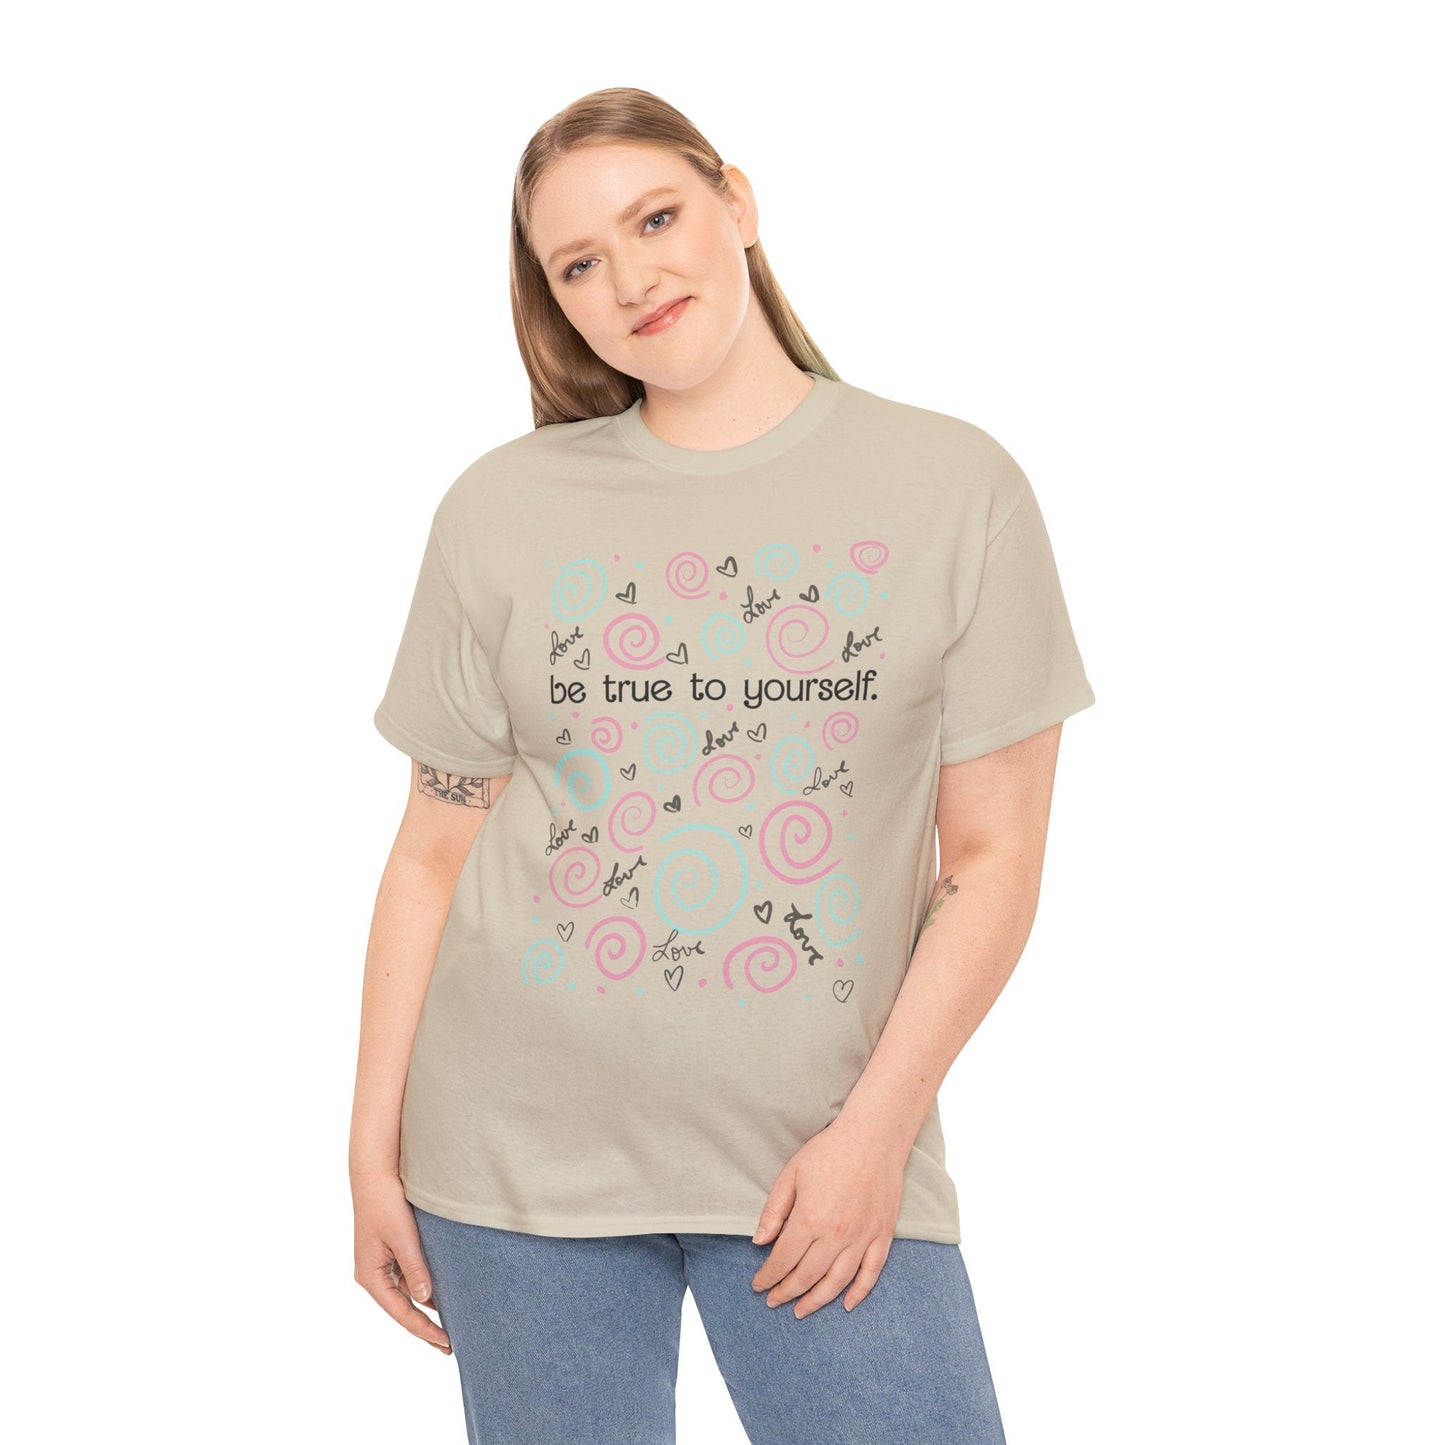 Trans Love 3.0 Be True To Yourself Ultimate Unisex Cotton Tee! - T - Shirt